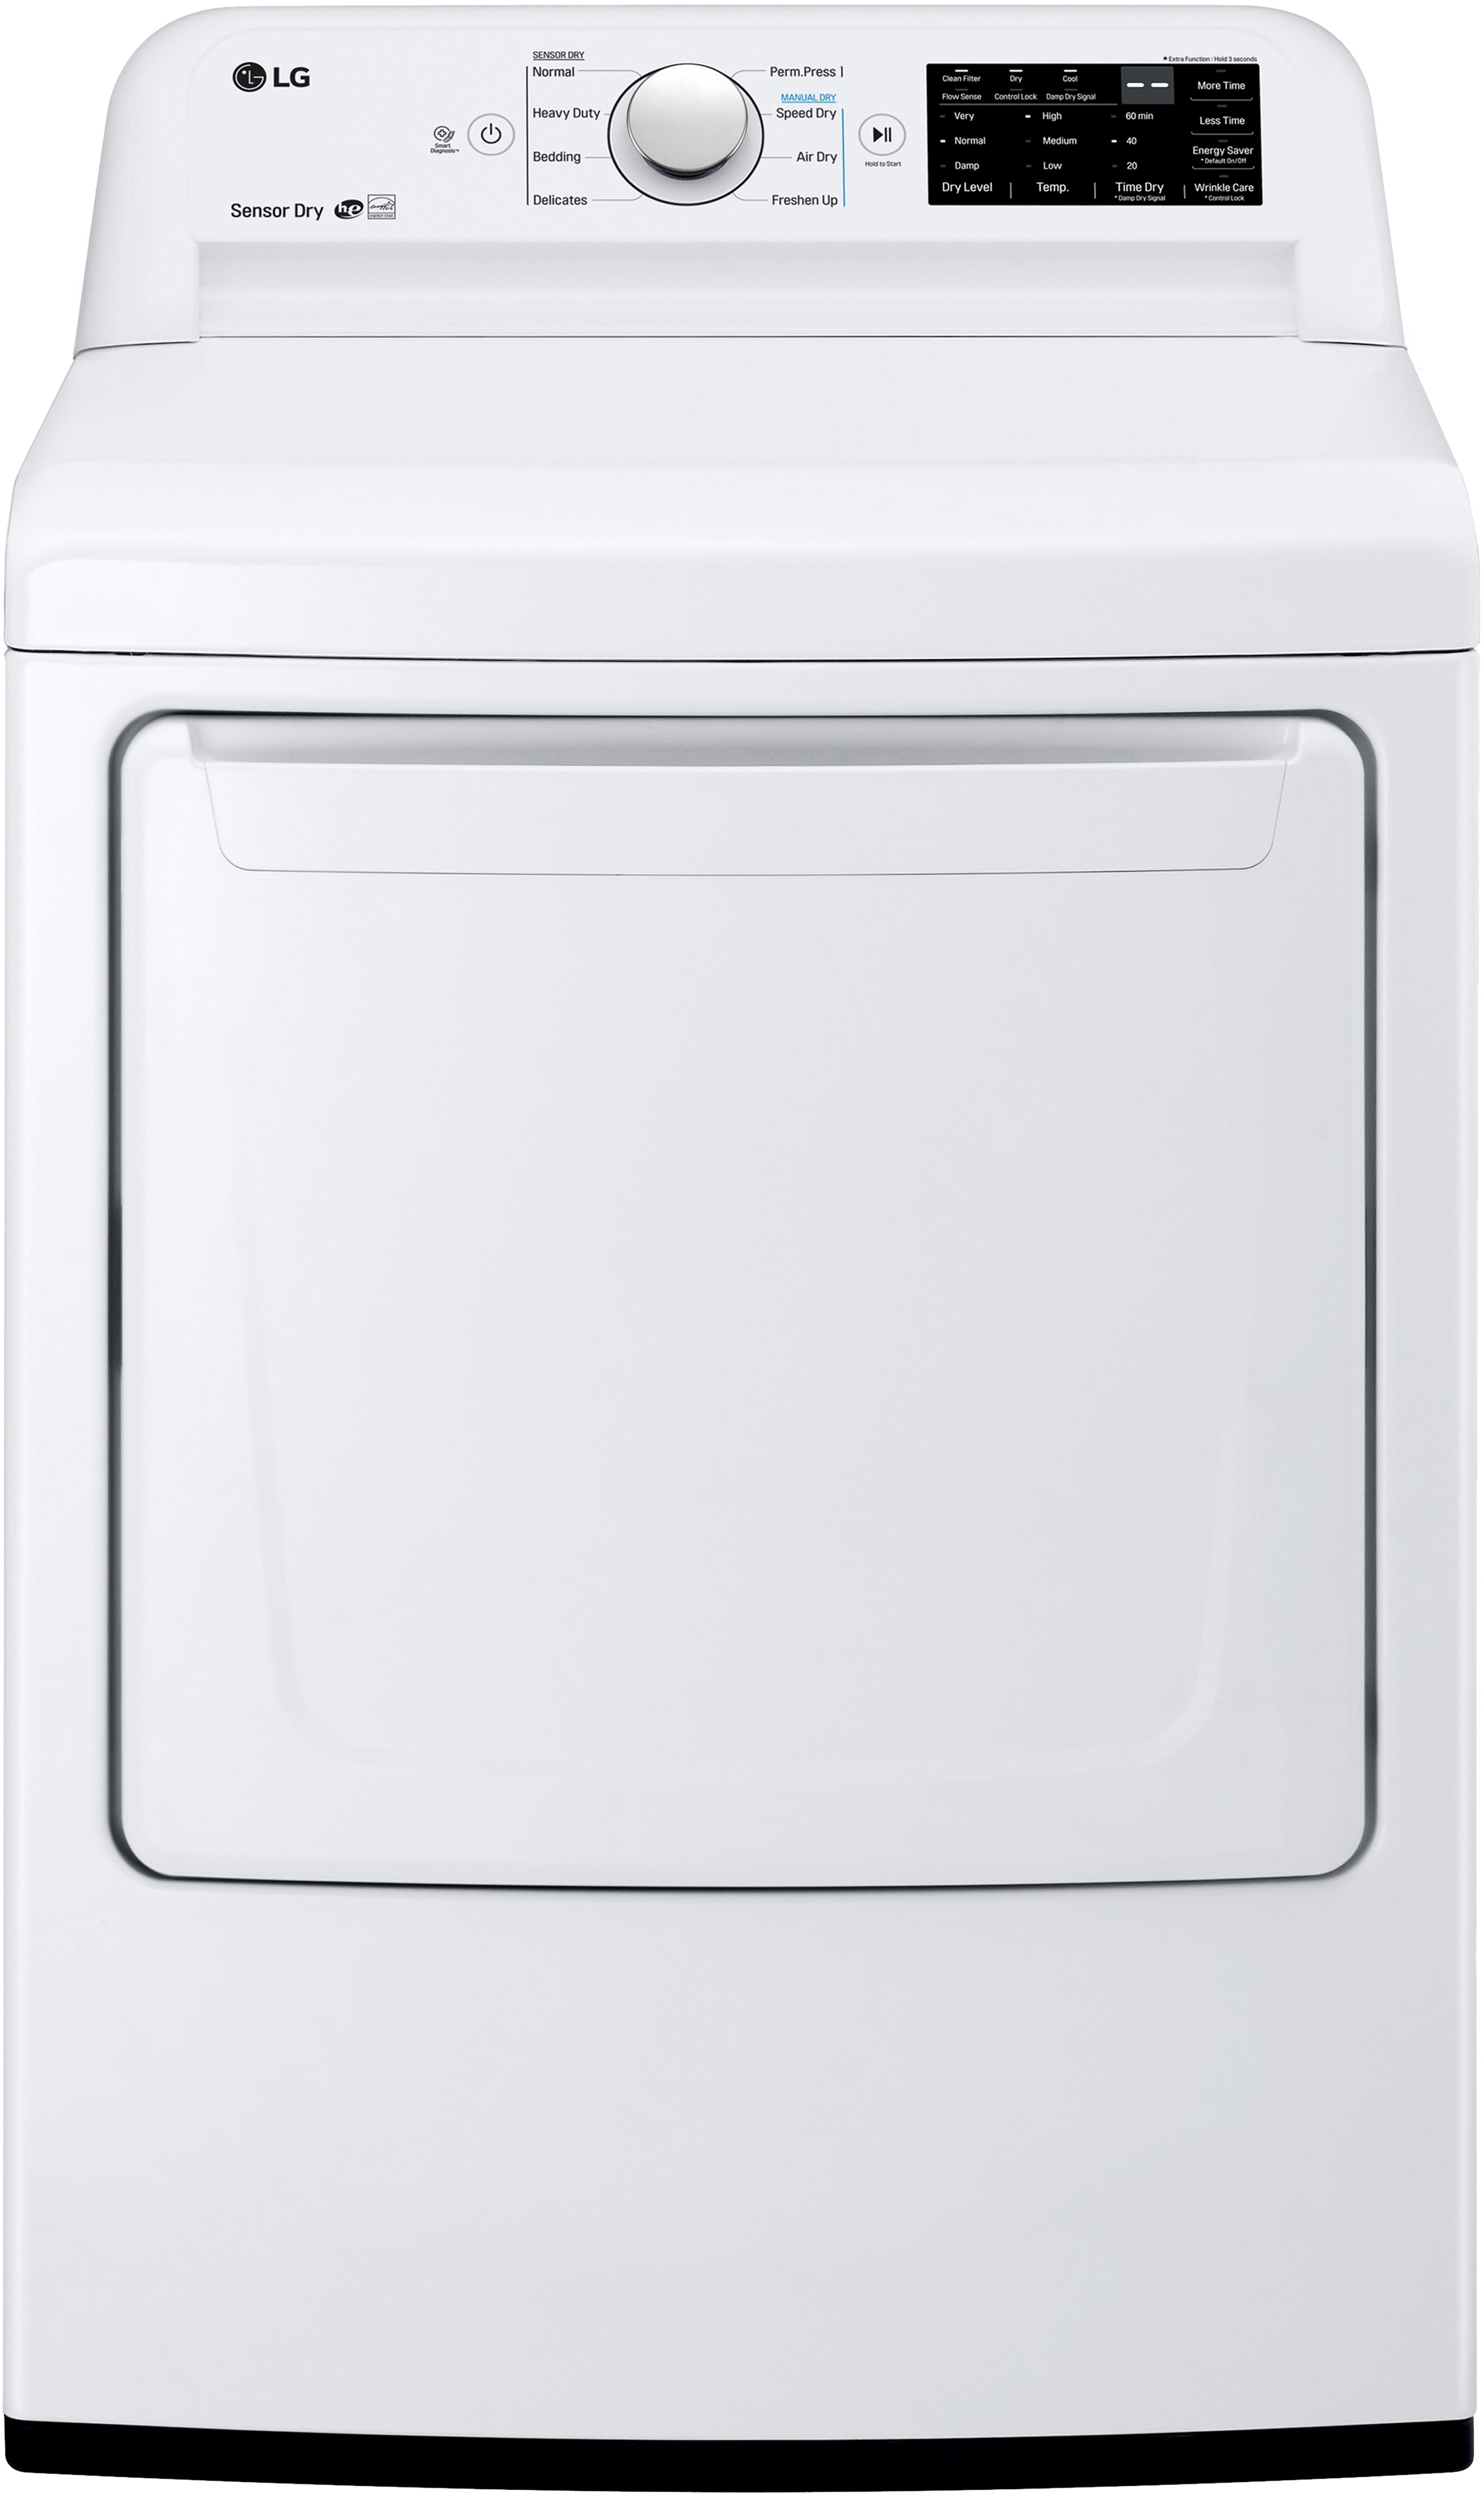 LG 7.3 Cu. Ft. White Front Load Gas Dryer-DLG7101W